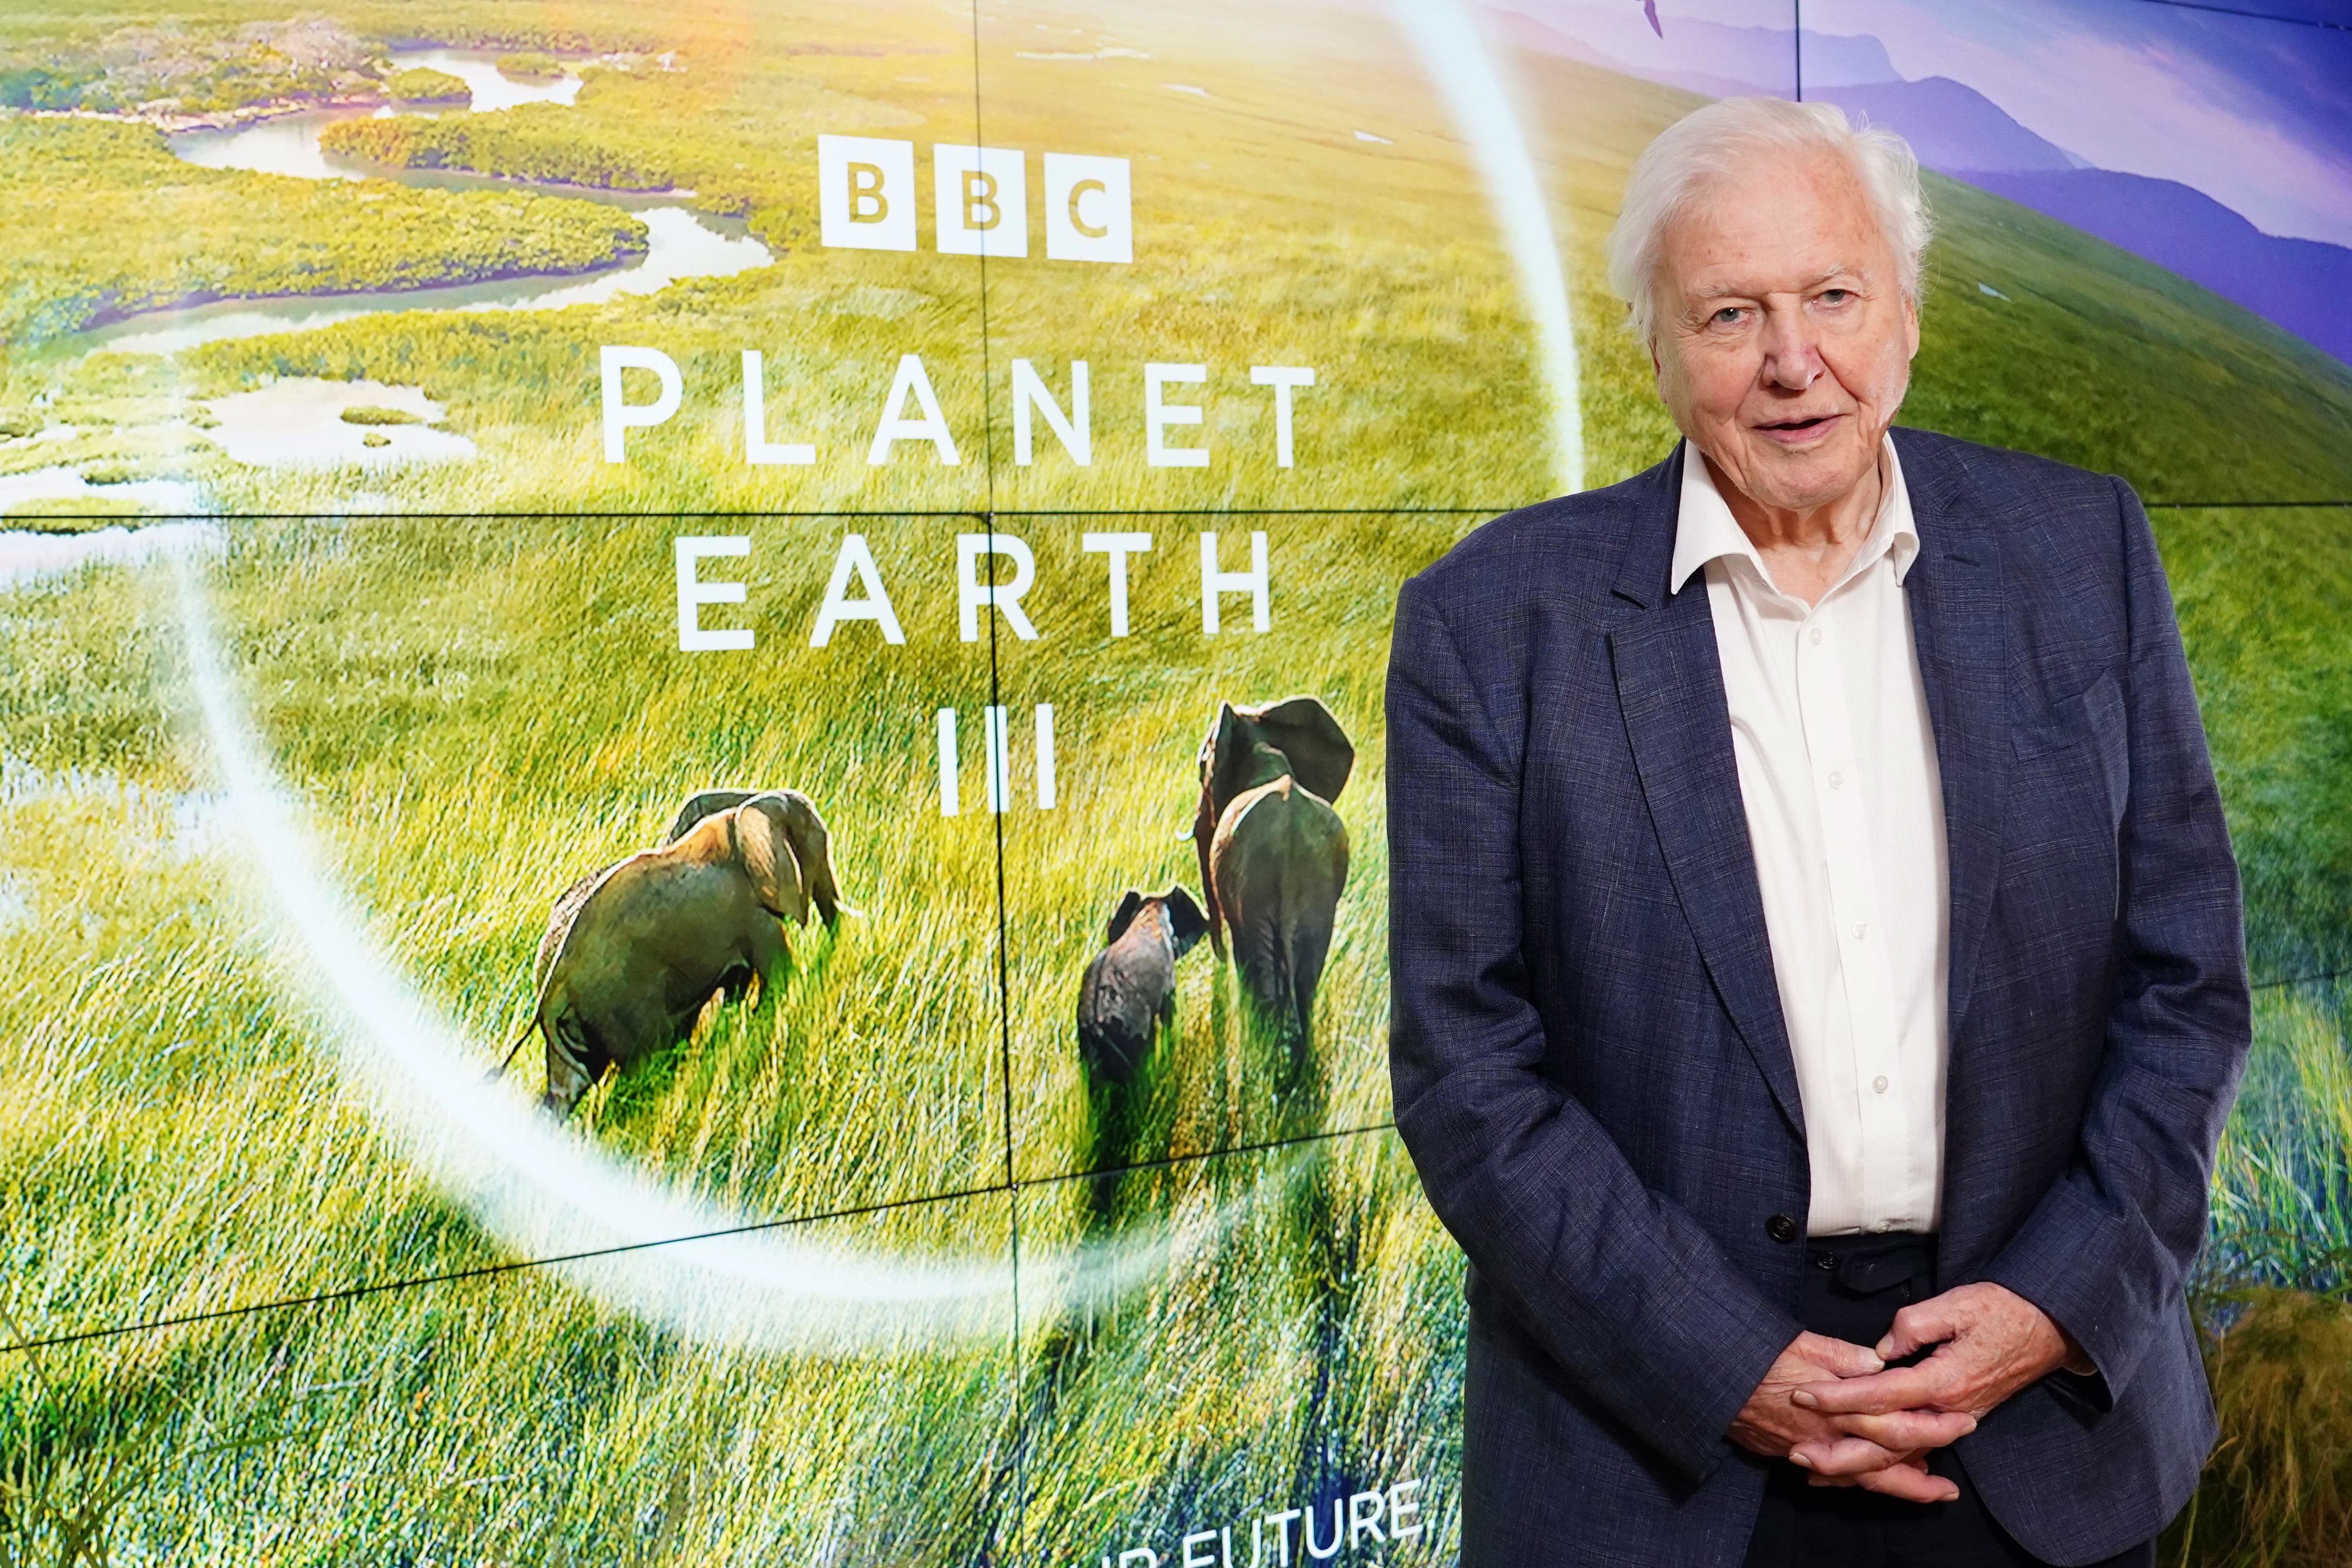 Sir David Attenborough at the global launch of BBC Studio’s Planet Earth III